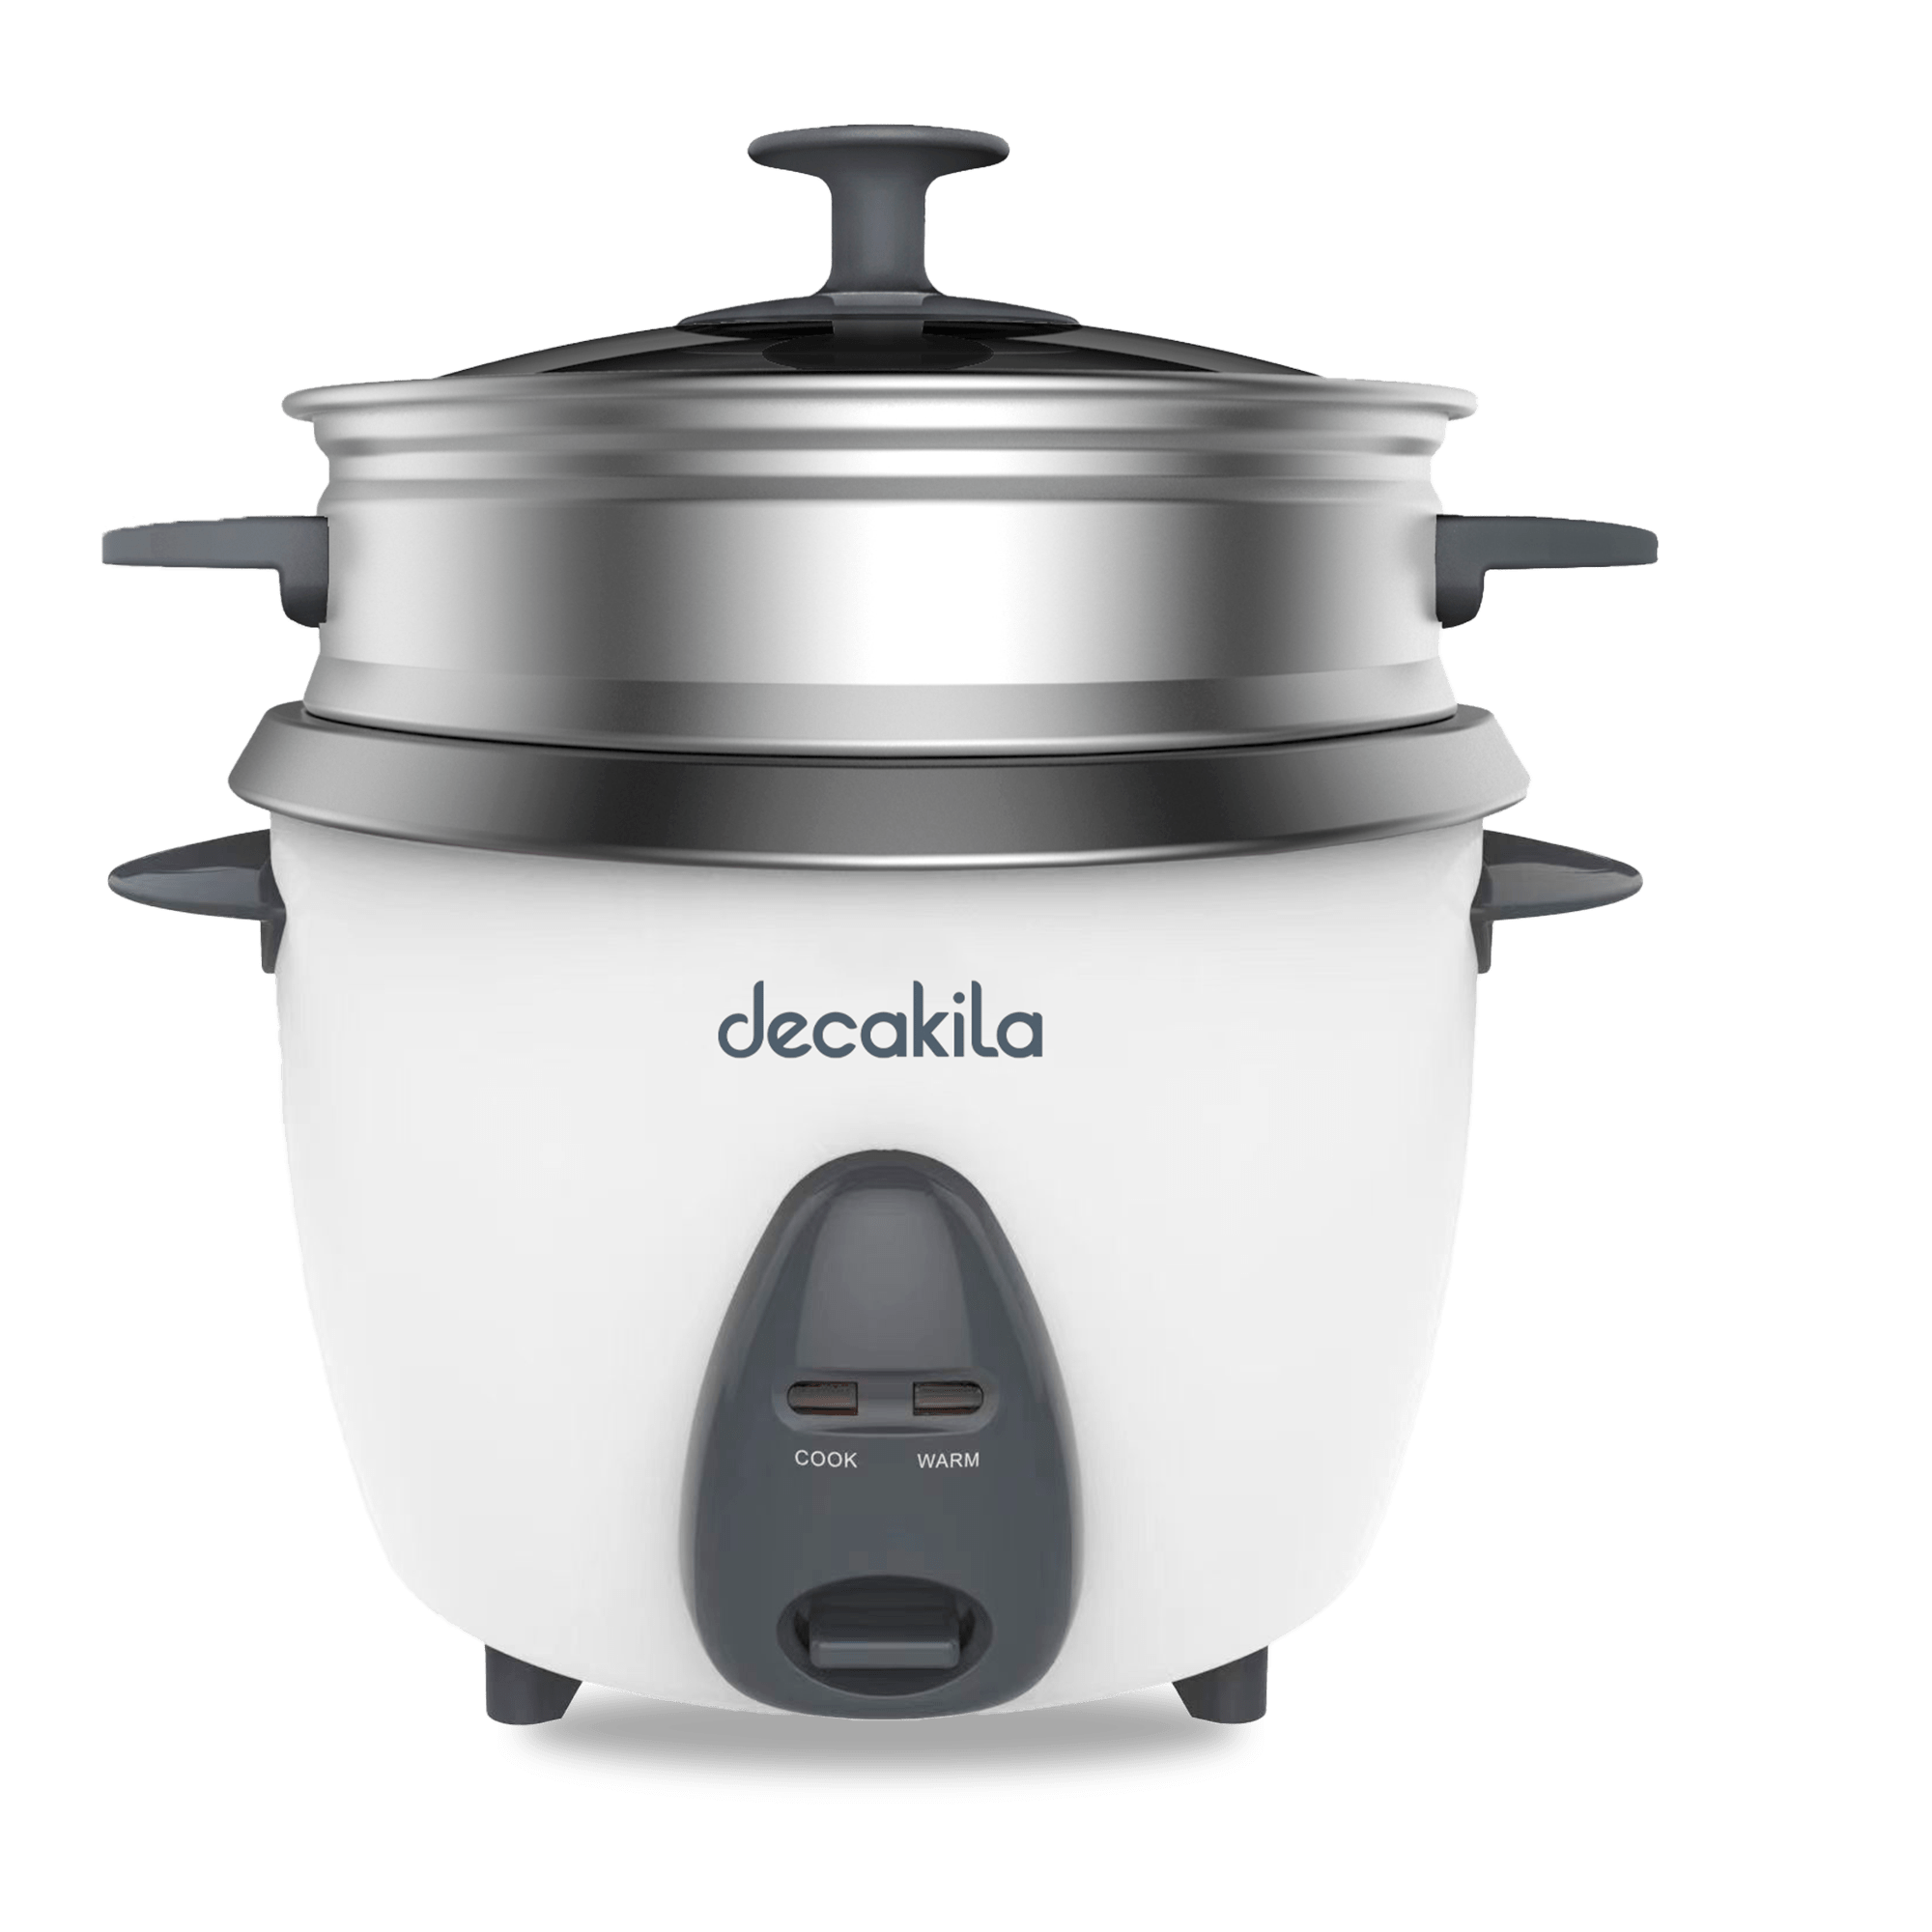 Decakila 1.8L Rice Cooker 700W - KEER034W | Buy Online in Accra, Ghana - Supply Master Kitchen Appliances Buy Tools hardware Building materials